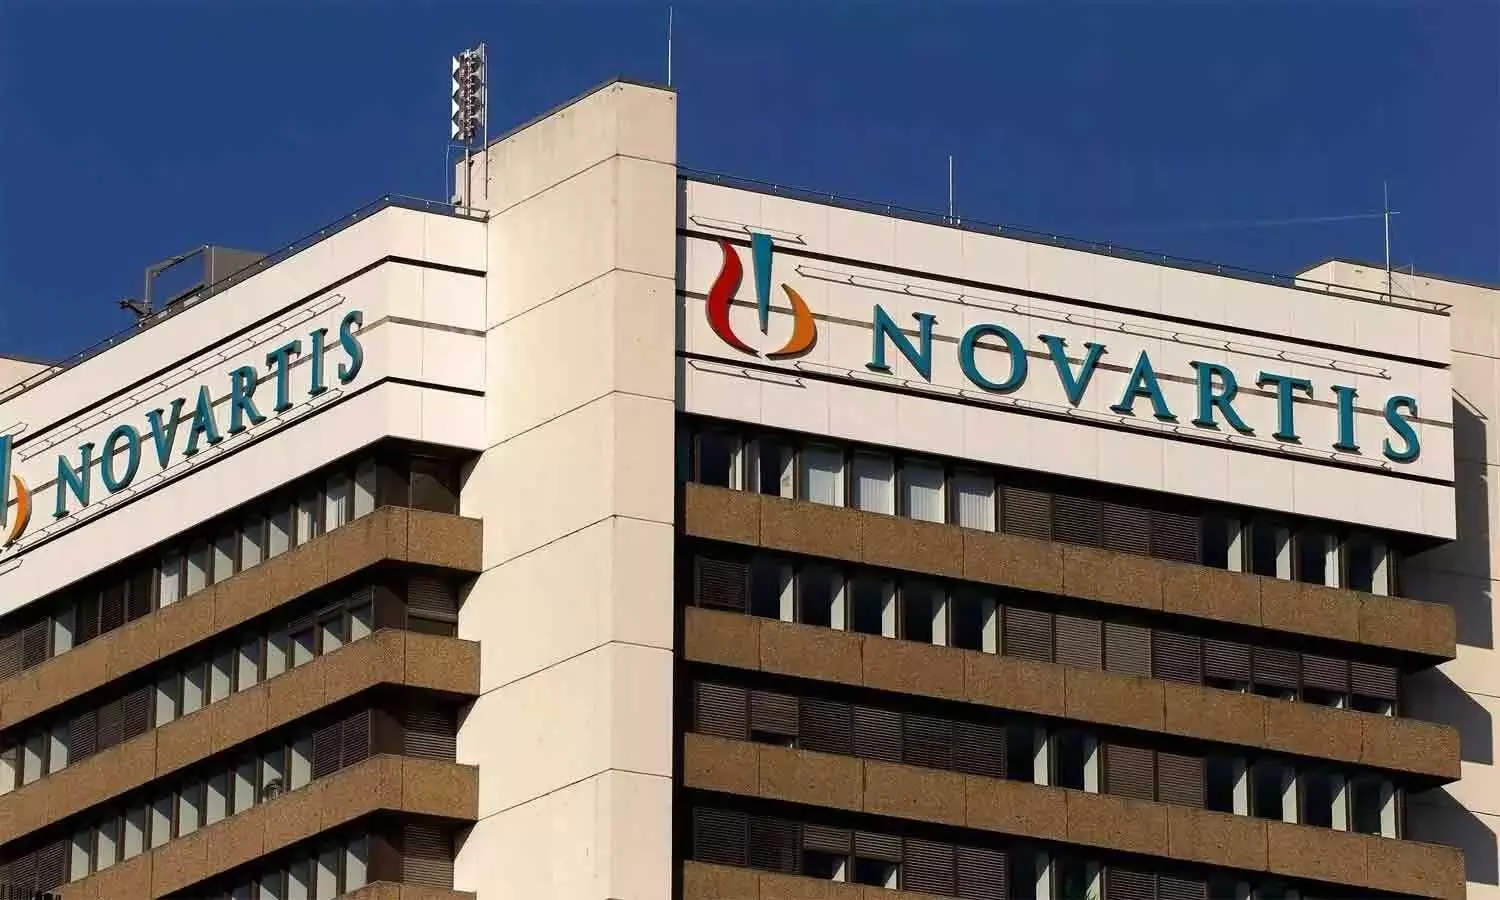 Novartis Kisqali reduced cancer recurrence risk while maintaining quality of life in patients diagnosed with early breast cancer